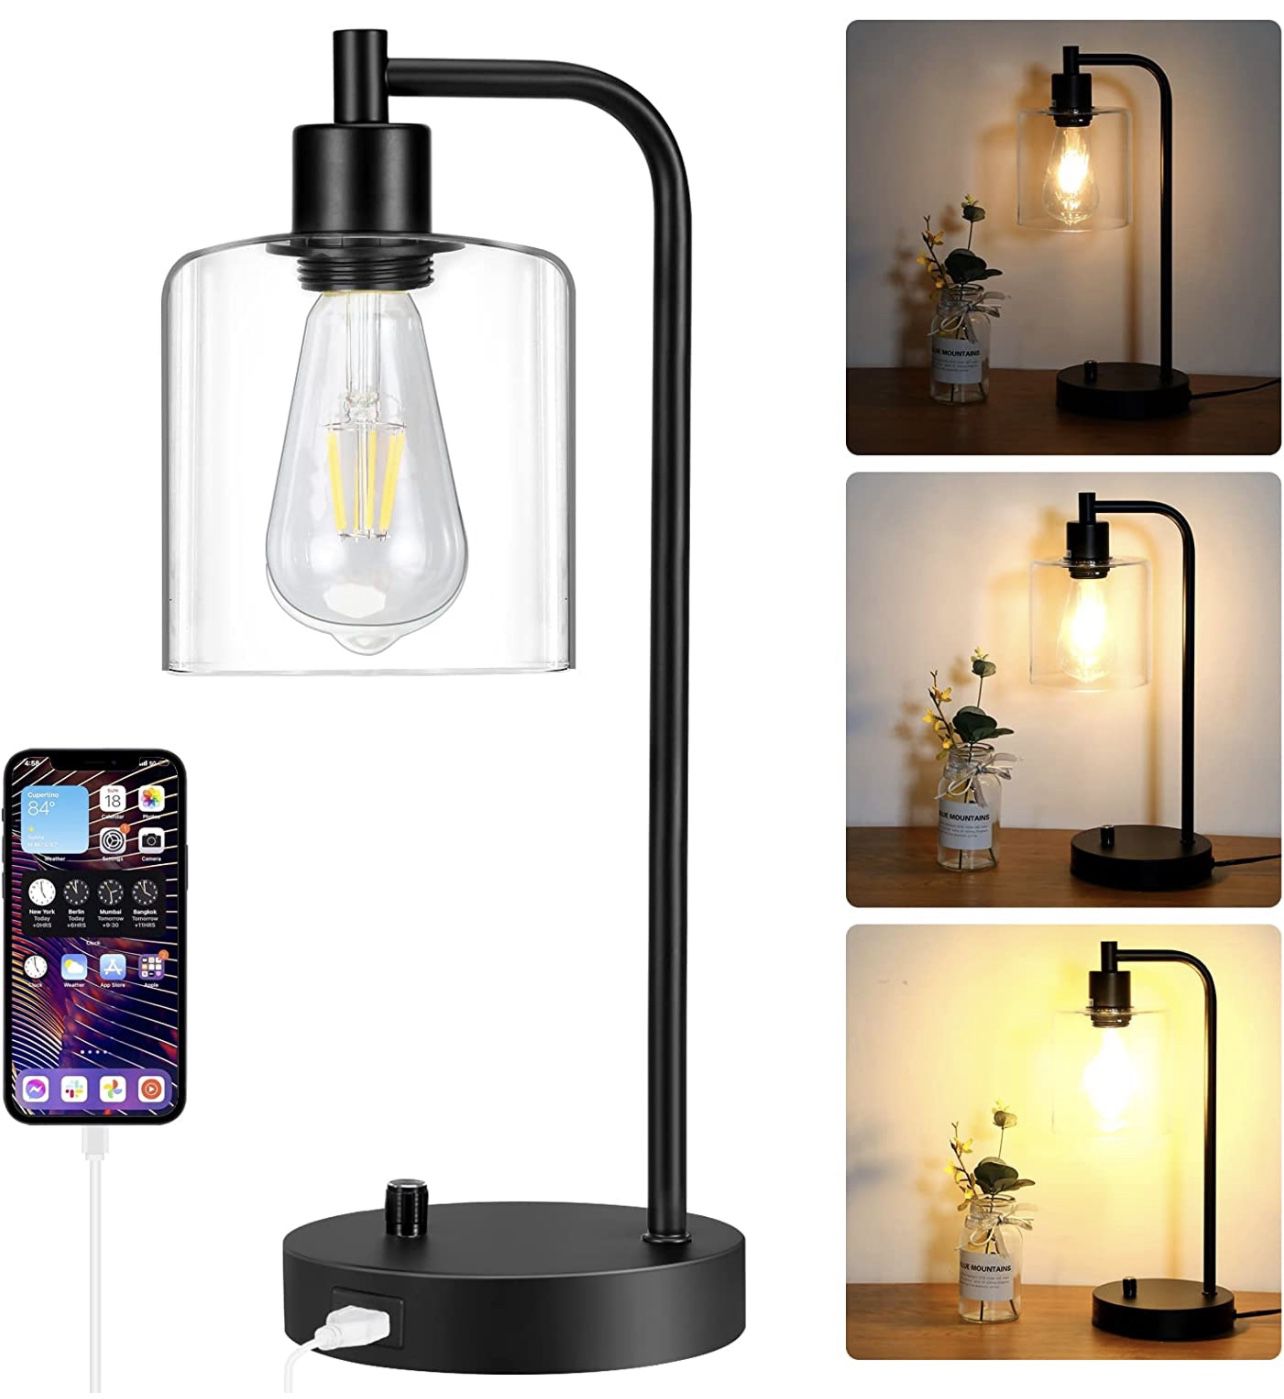 Table Lamp, Industrial Desk Lamp with USB Charging Port, Modern Dimmable Bedside Nightstand Lamp with Glass Shade for Bedroom Living Room Office, LED 